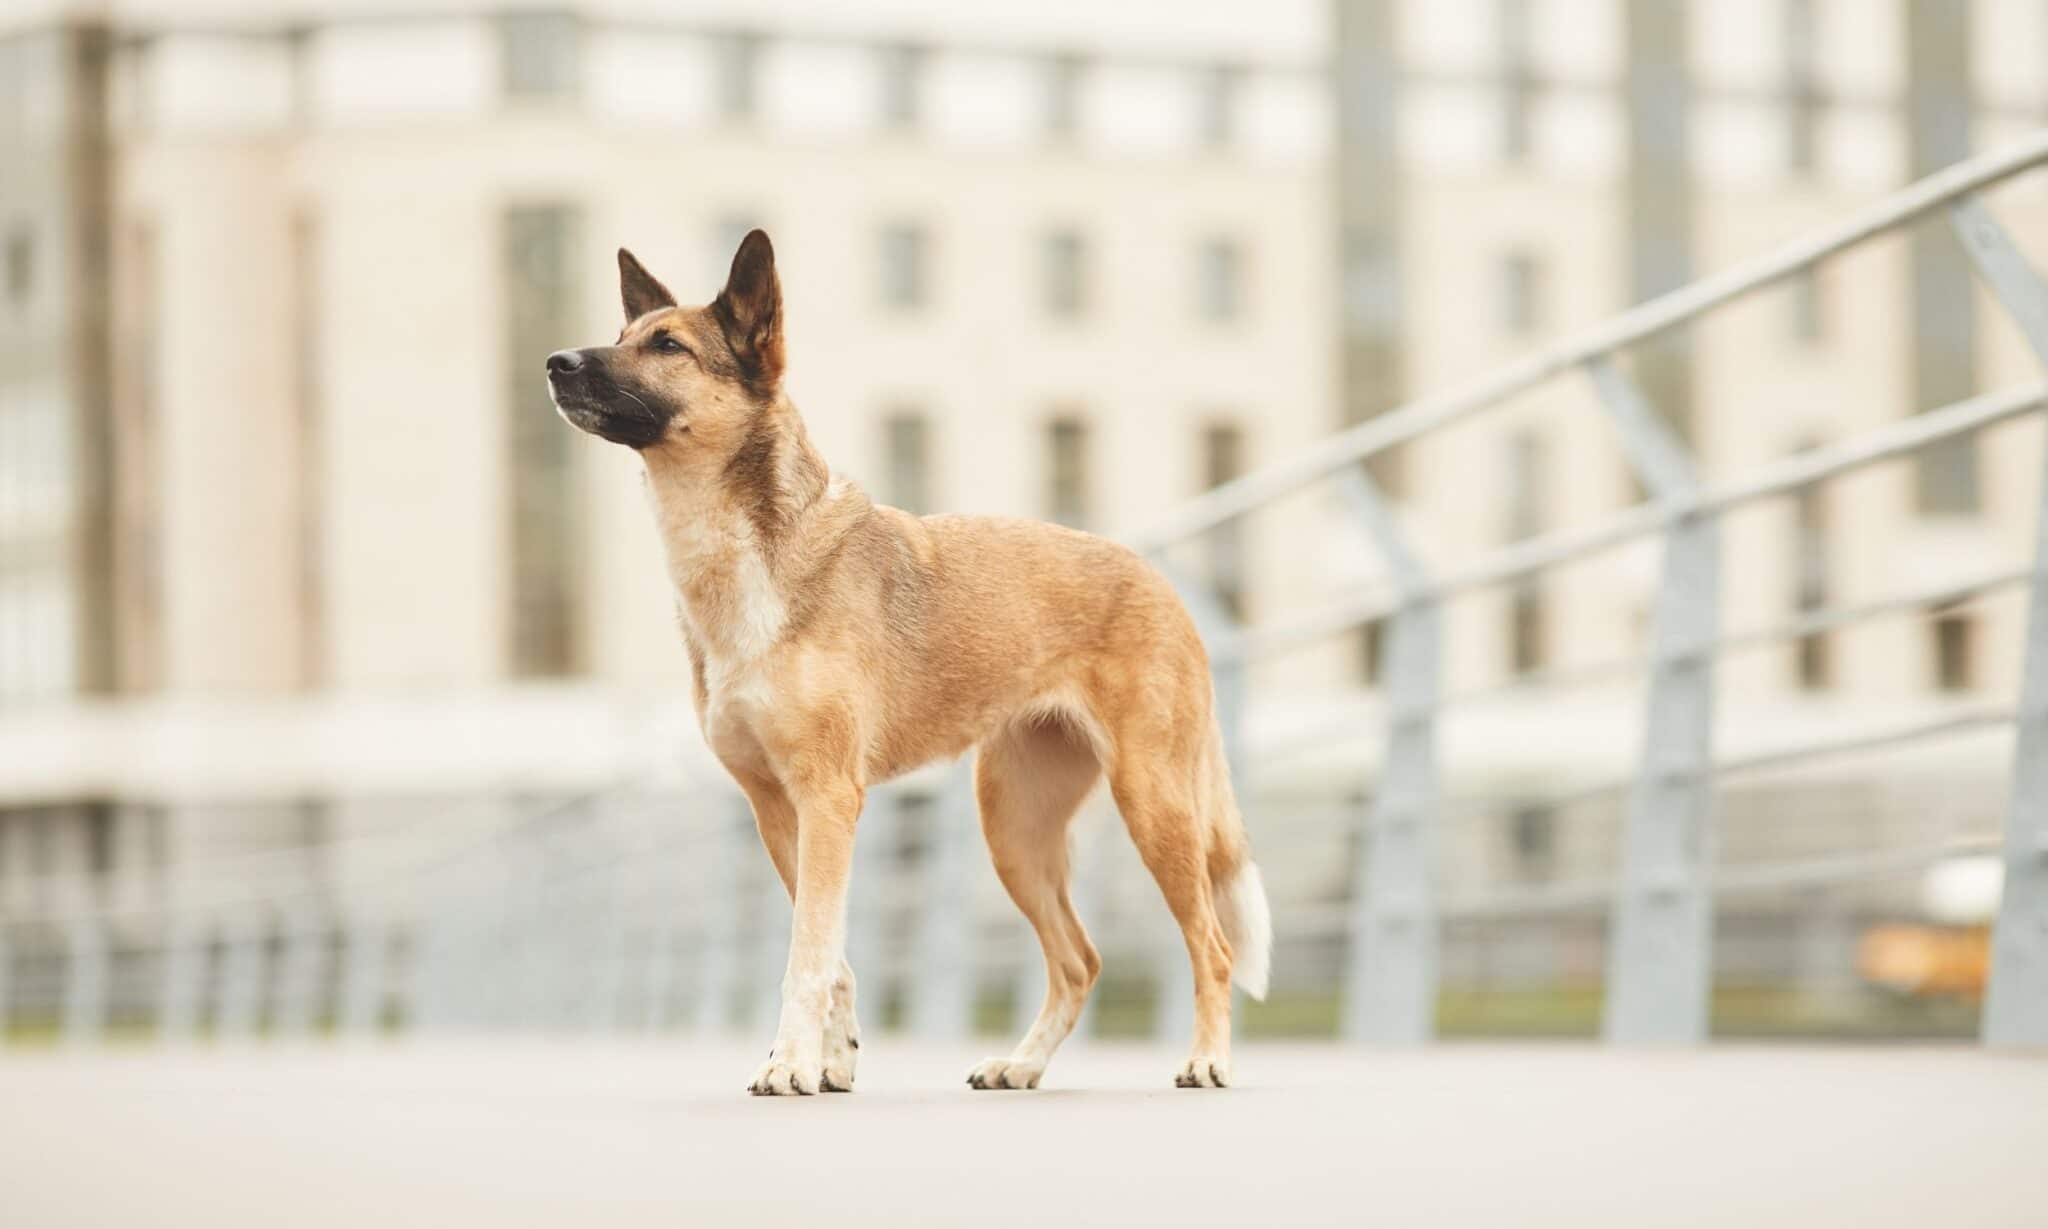 Help Your Dog Transition To City Life With These Tips